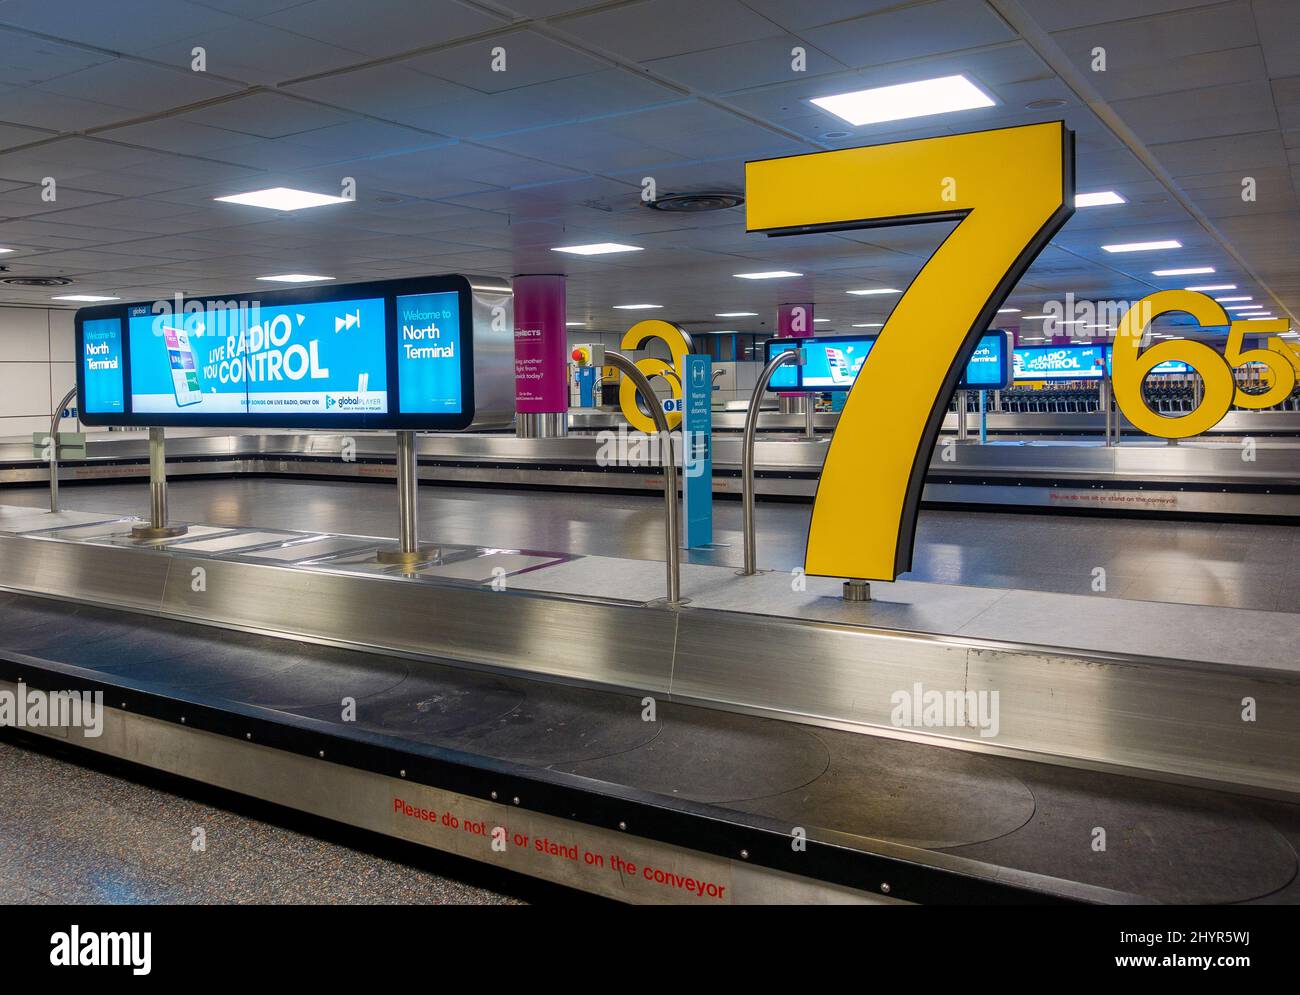 Colourful and modern airport baggage carousel showing no people or luggage Stock Photo